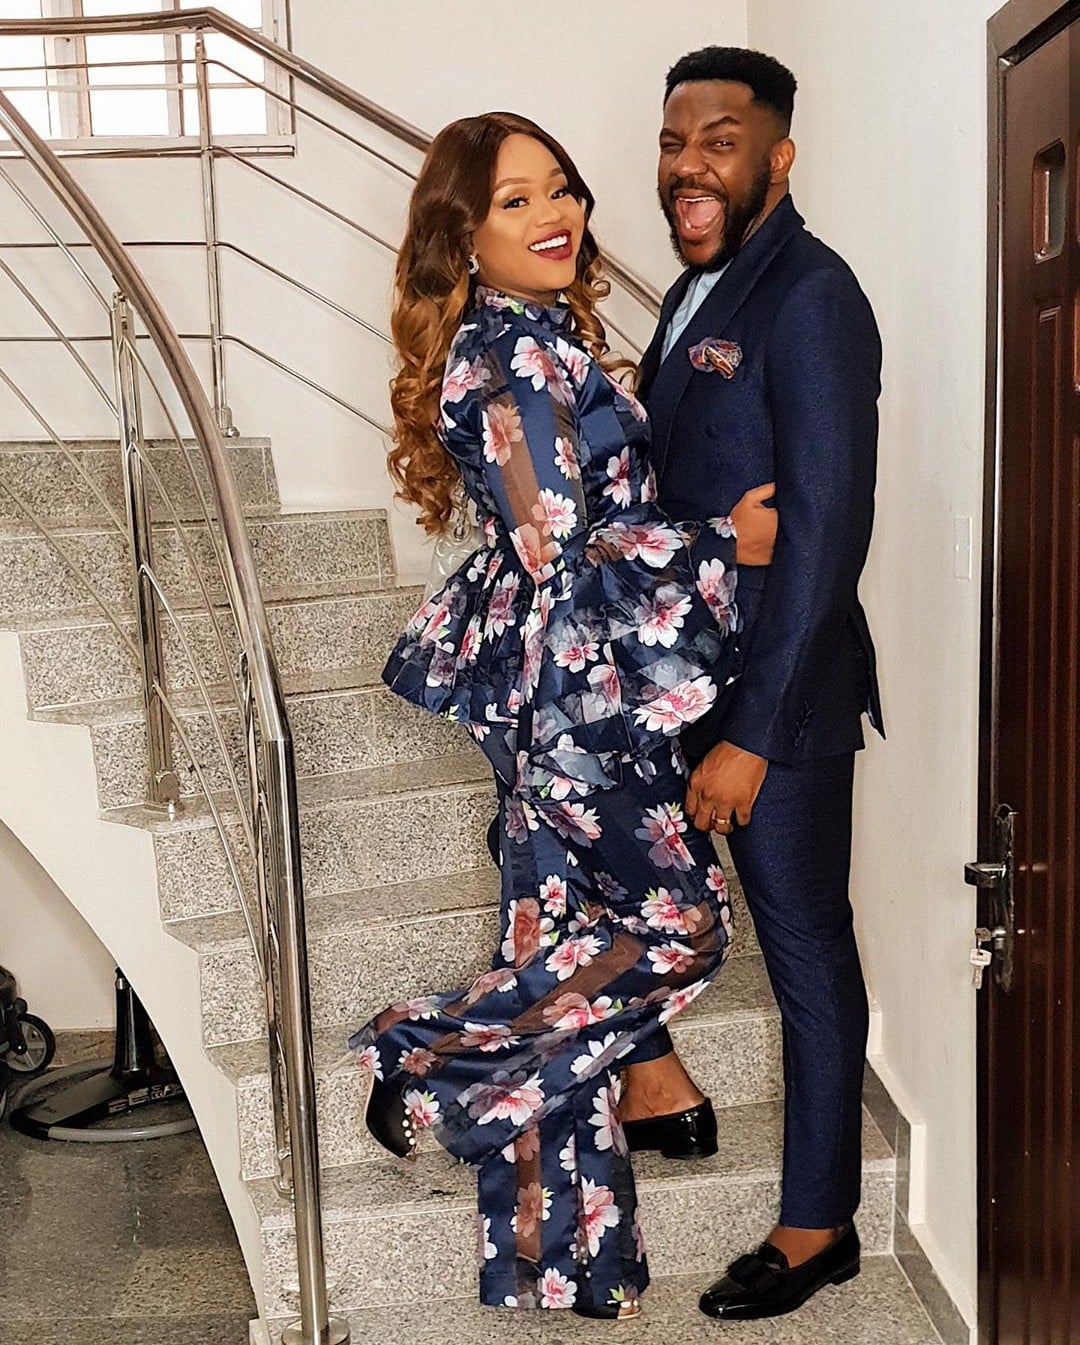 "He has found another talent" - Ebuka's wife, Cynthia gushes over her hubby as he relaxes her hair (Video)